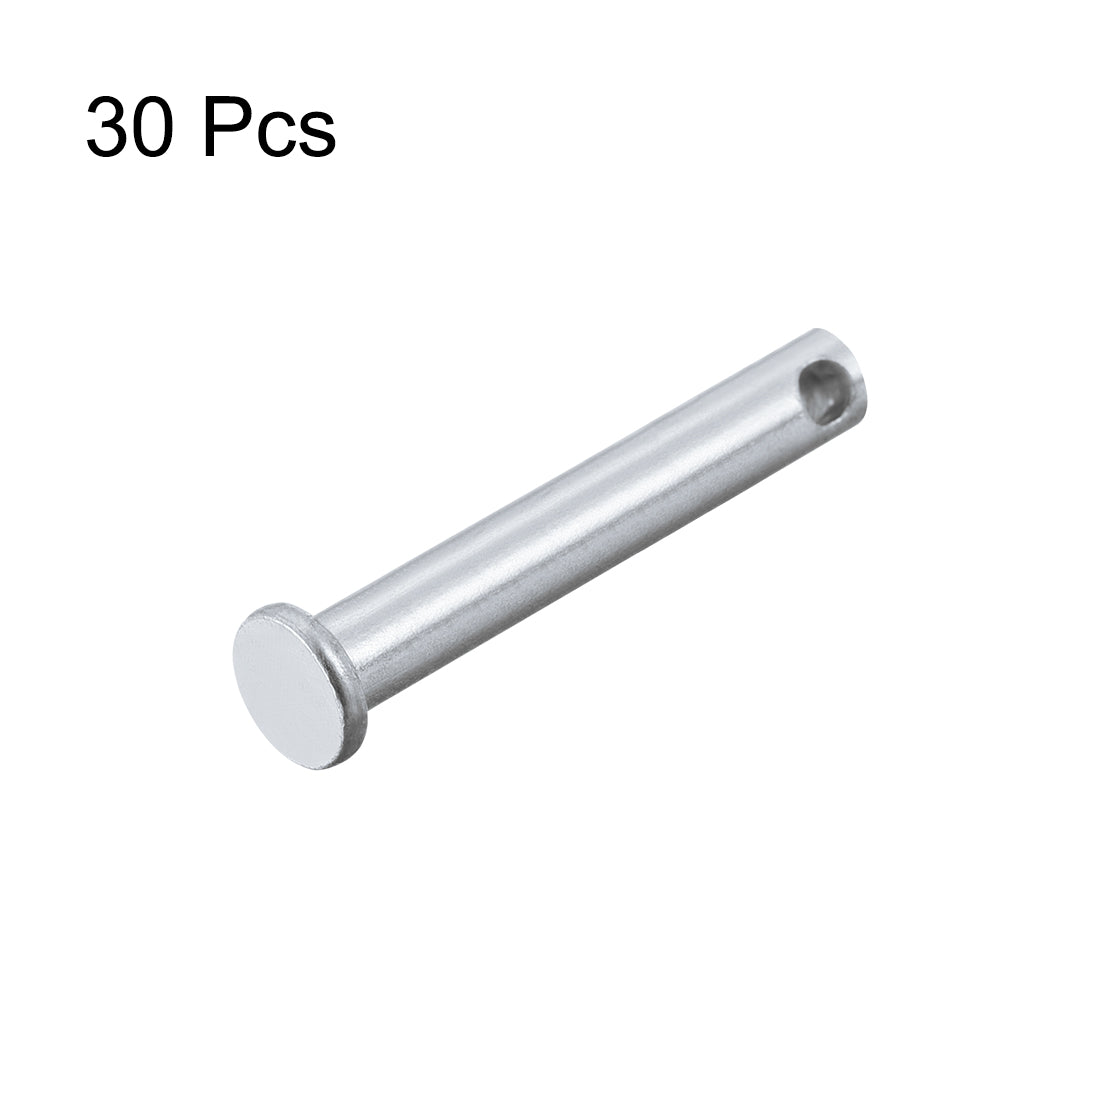 Uxcell Uxcell Single Hole Clevis Pins - 6mm X 60mm Flat Head Zinc-Plating Solid Steel Link Hinge Pin 30Pcs